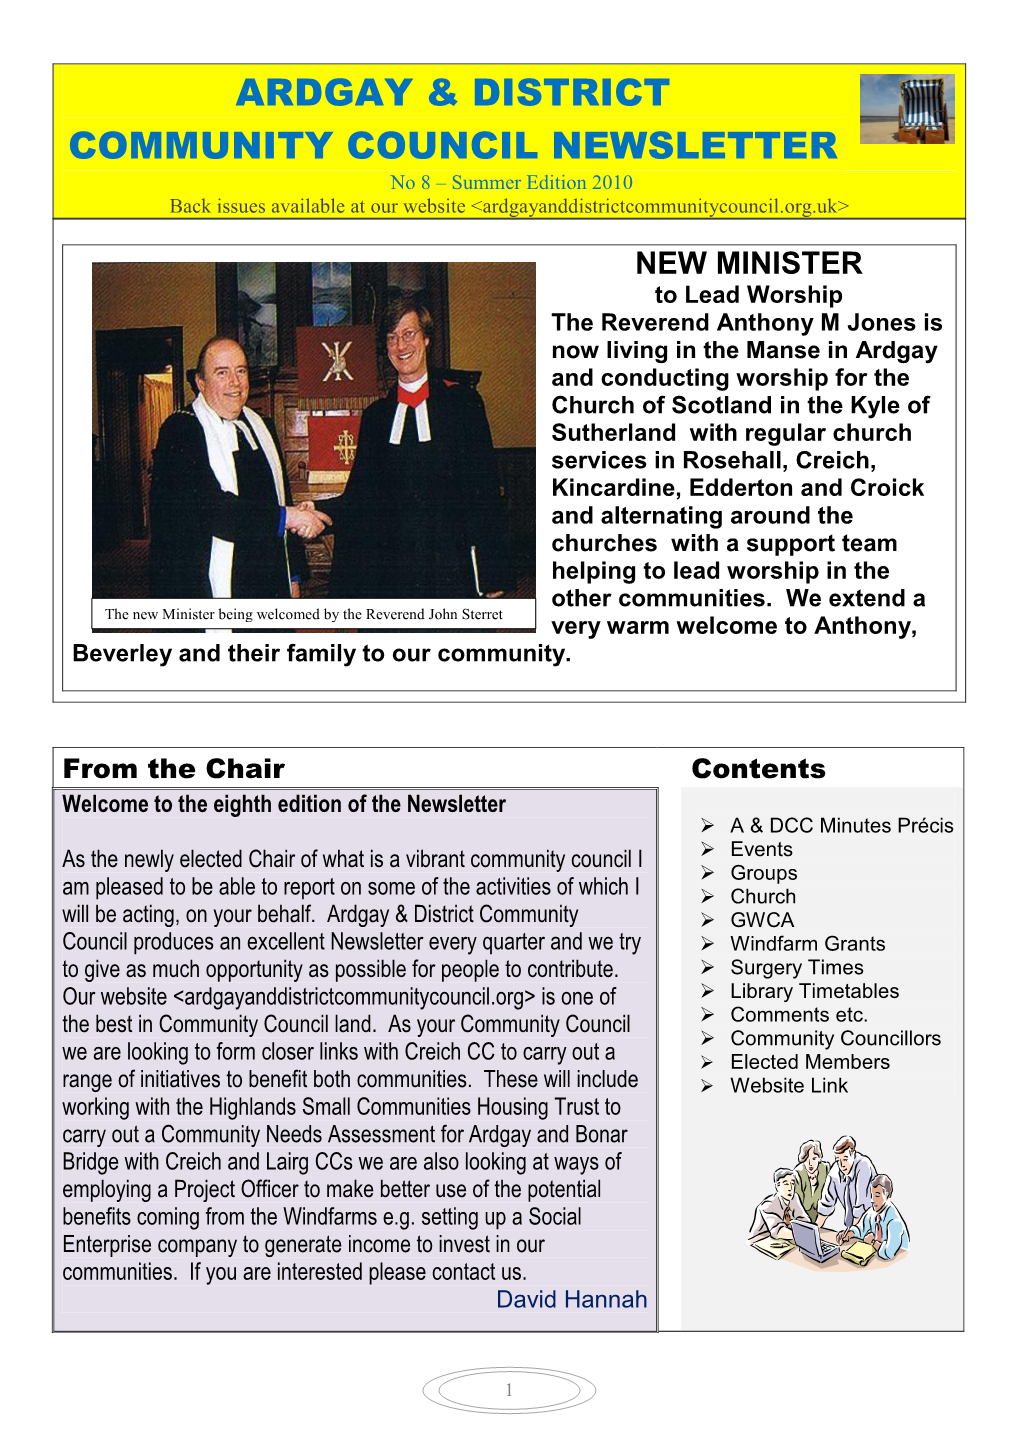 Ardgay & District Community Council Newsletter